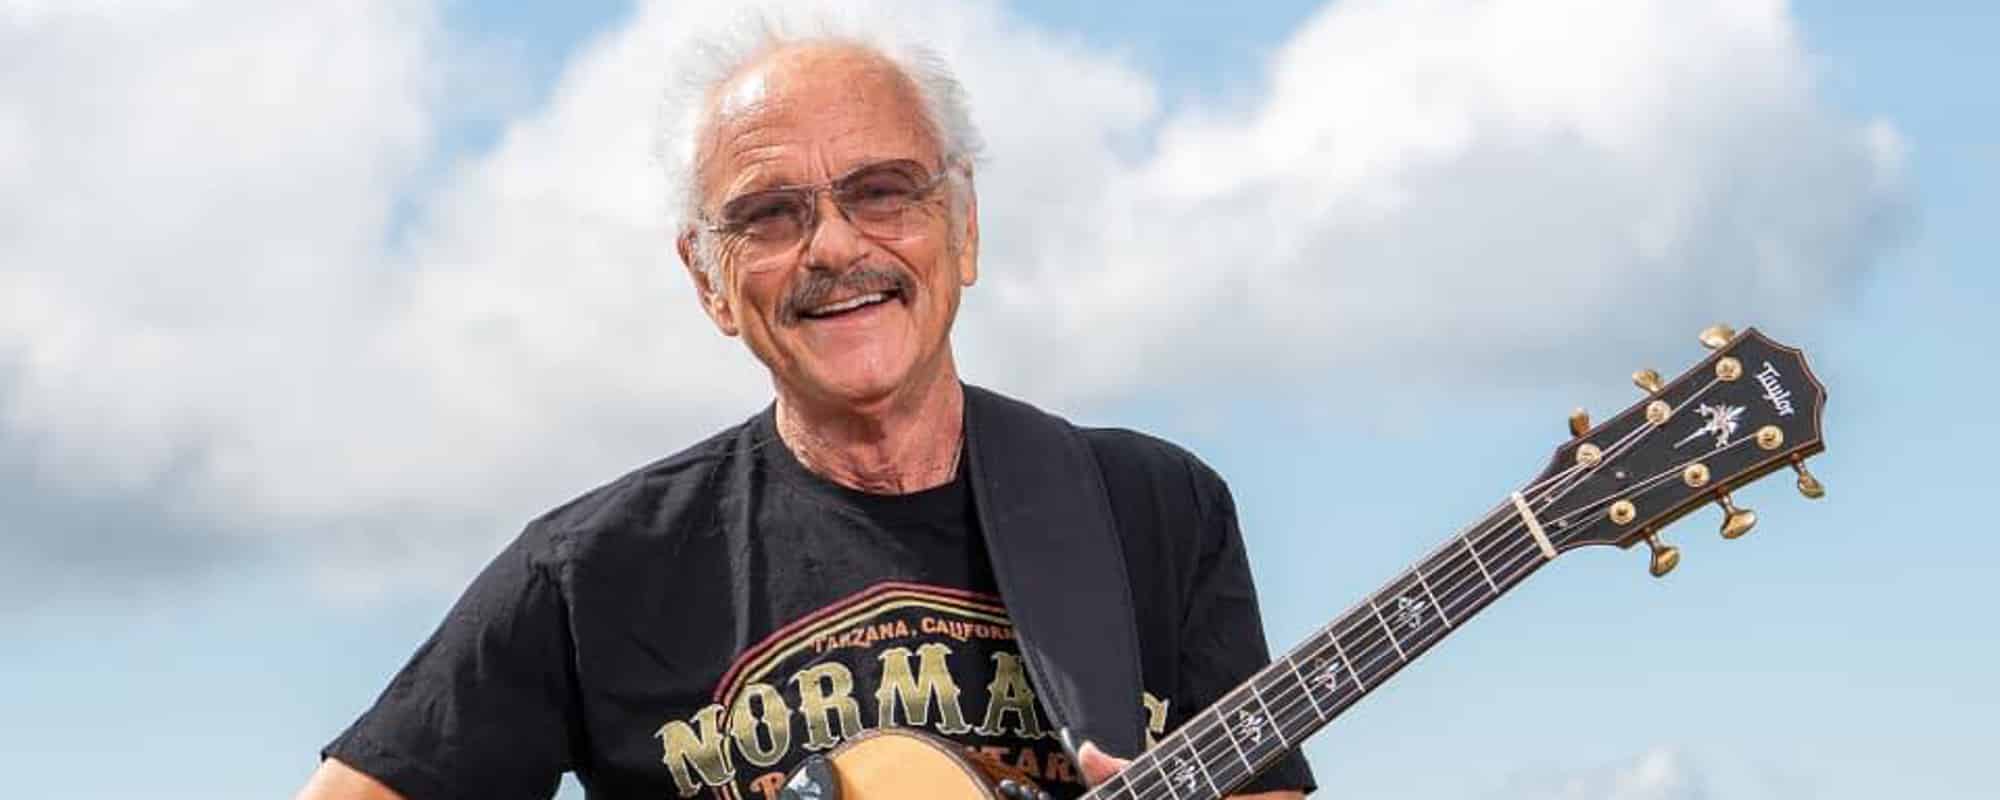 Jesse Colin Young Taking Part in Special Concert and Film-Screening Events in San Francisco and L.A.